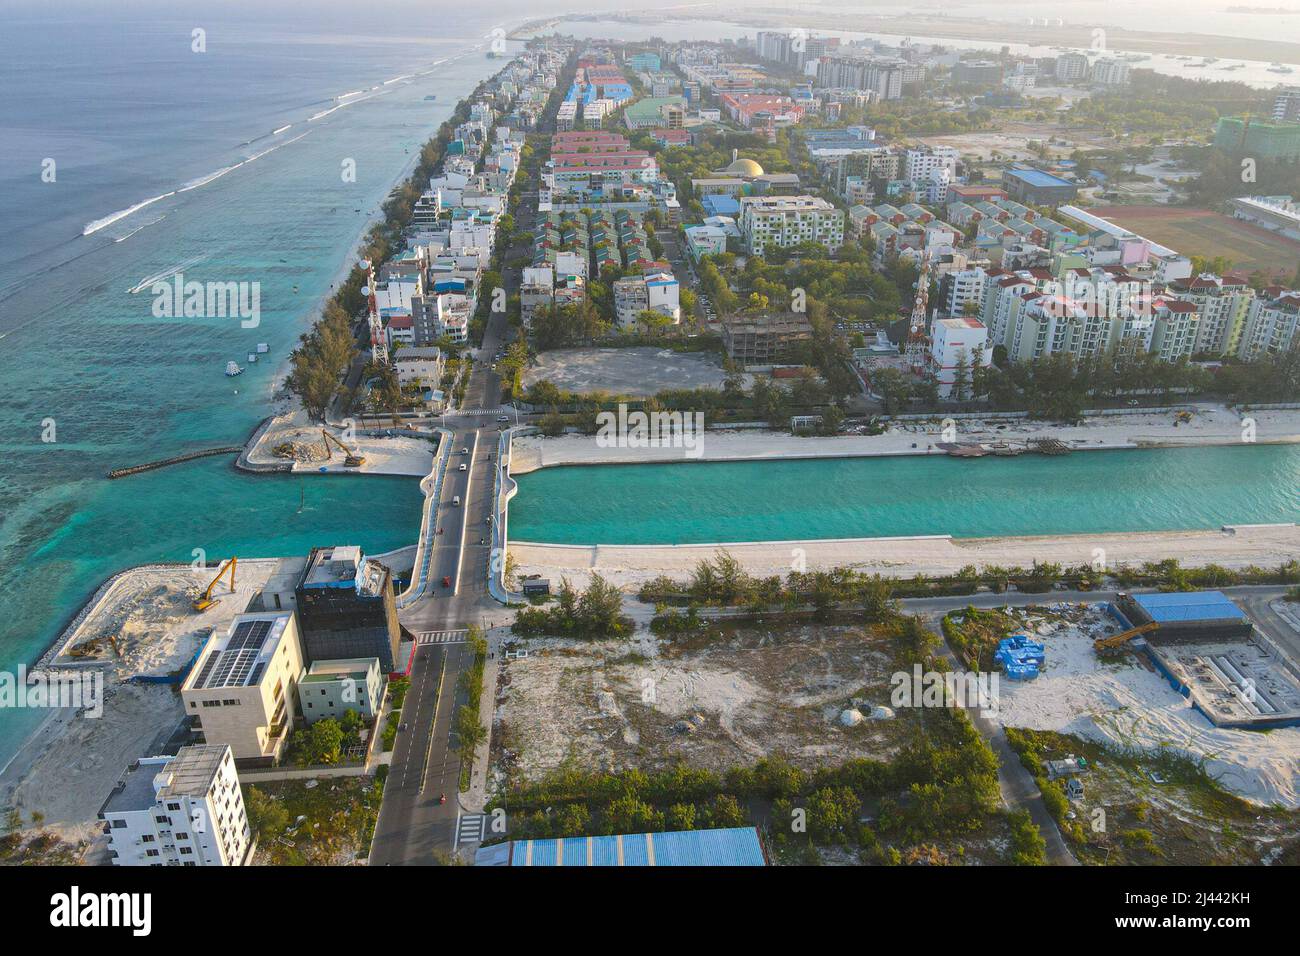 220412) -- HULHUMALE, April 12, 2022 (Xinhua) -- Aerial photo taken on  March 24, 2022 shows a bridge built by the China State Construction  Engineering Corporation (CSCEC) in Hulhumale, Maldives. It all